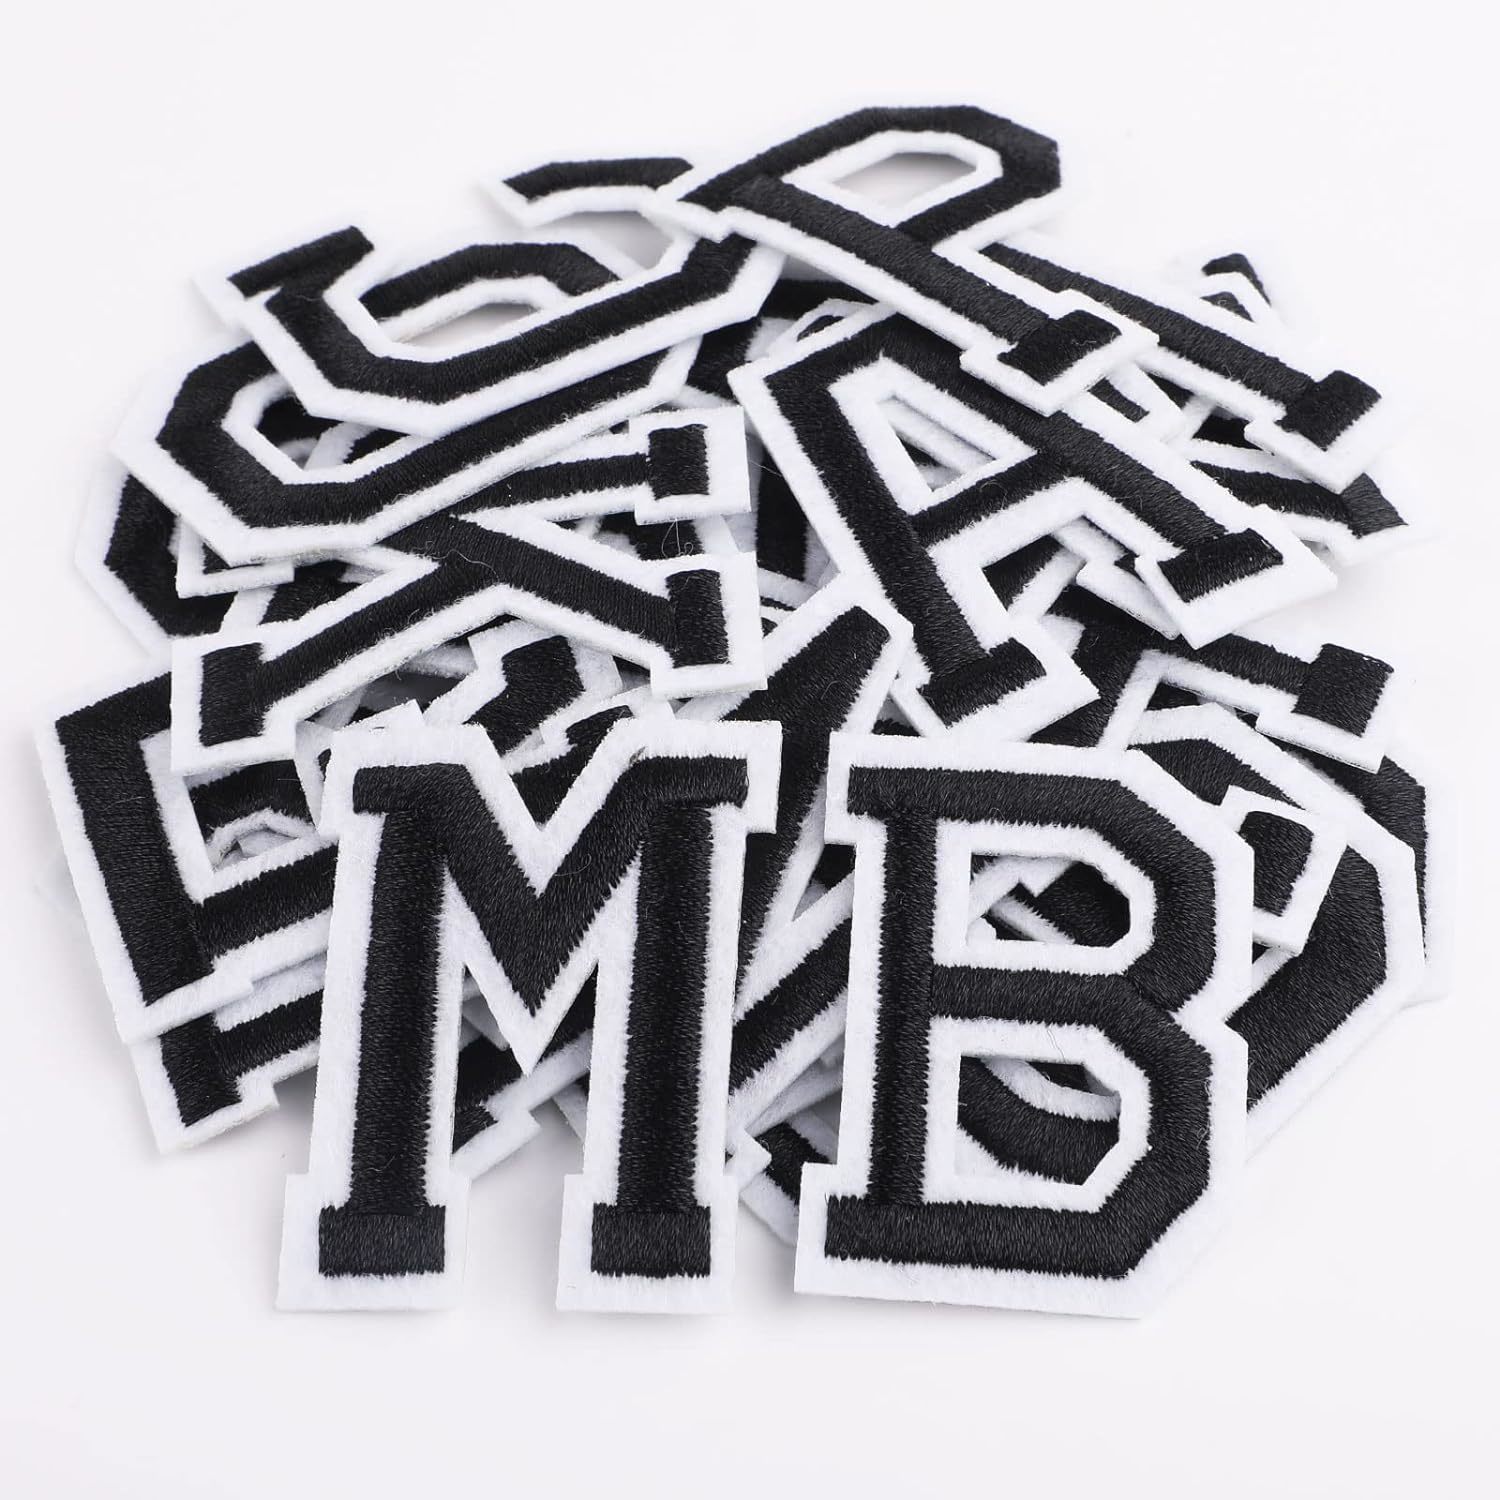 Primary image for Iron On Letters, 52 Pcs Letter Patches With Ironed Adhesive, Decorate Iron On Le